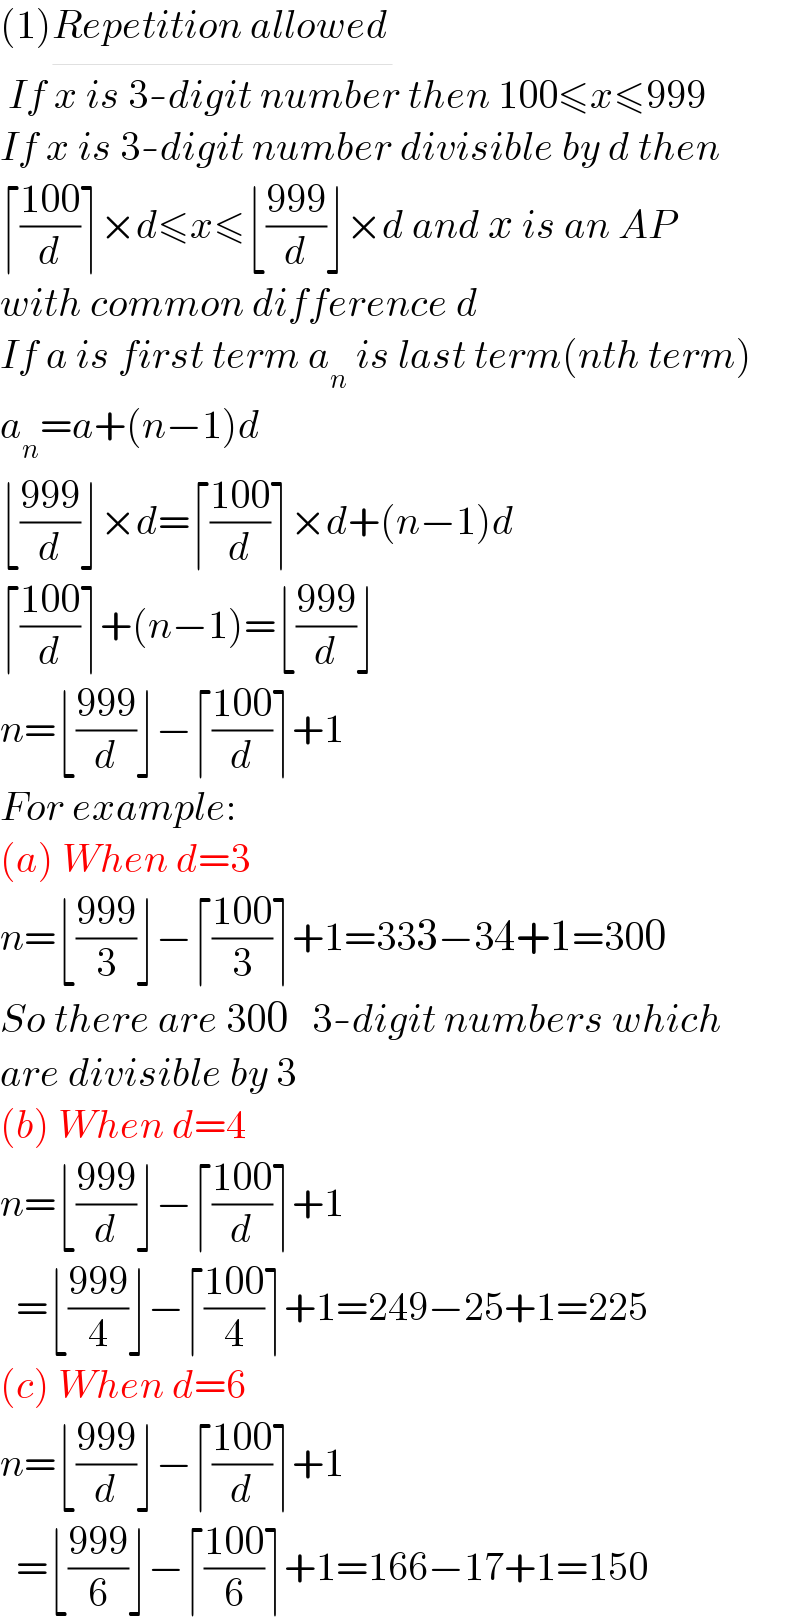 (1)Repetition allowed_     If x is 3-digit number then 100≤x≤999  If x is 3-digit number divisible by d then  ⌈((100)/d)⌉×d≤x≤⌊((999)/d)⌋×d and x is an AP  with common difference d  If a is first term a_n  is last term(nth term)  a_n =a+(n−1)d  ⌊((999)/d)⌋×d=⌈((100)/d)⌉×d+(n−1)d  ⌈((100)/d)⌉+(n−1)=⌊((999)/d)⌋  n=⌊((999)/d)⌋−⌈((100)/d)⌉+1  For example:  (a) When d=3  n=⌊((999)/3)⌋−⌈((100)/3)⌉+1=333−34+1=300  So there are 300   3-digit numbers which  are divisible by 3  (b) When d=4  n=⌊((999)/d)⌋−⌈((100)/d)⌉+1    =⌊((999)/4)⌋−⌈((100)/4)⌉+1=249−25+1=225  (c) When d=6  n=⌊((999)/d)⌋−⌈((100)/d)⌉+1    =⌊((999)/6)⌋−⌈((100)/6)⌉+1=166−17+1=150  